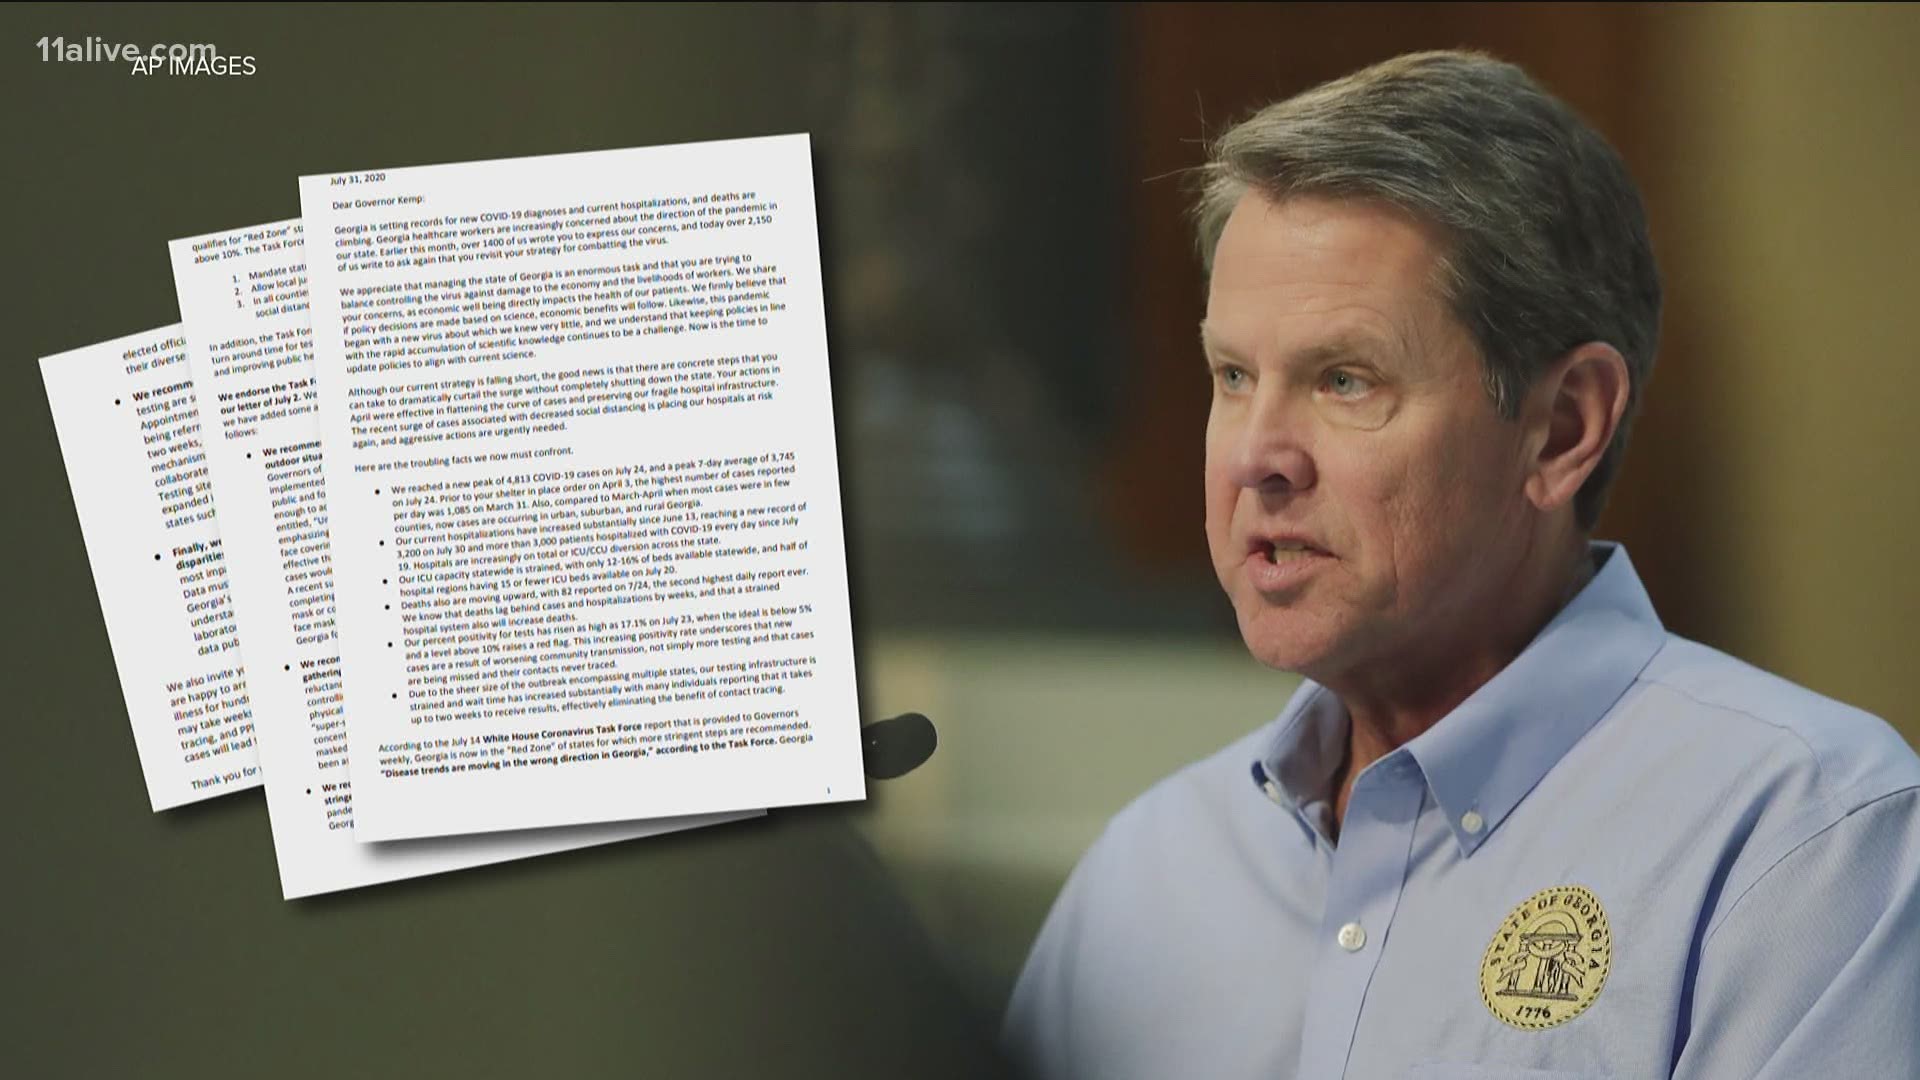 More than 2,000 healthcare professionals signed the letter to Kemp.